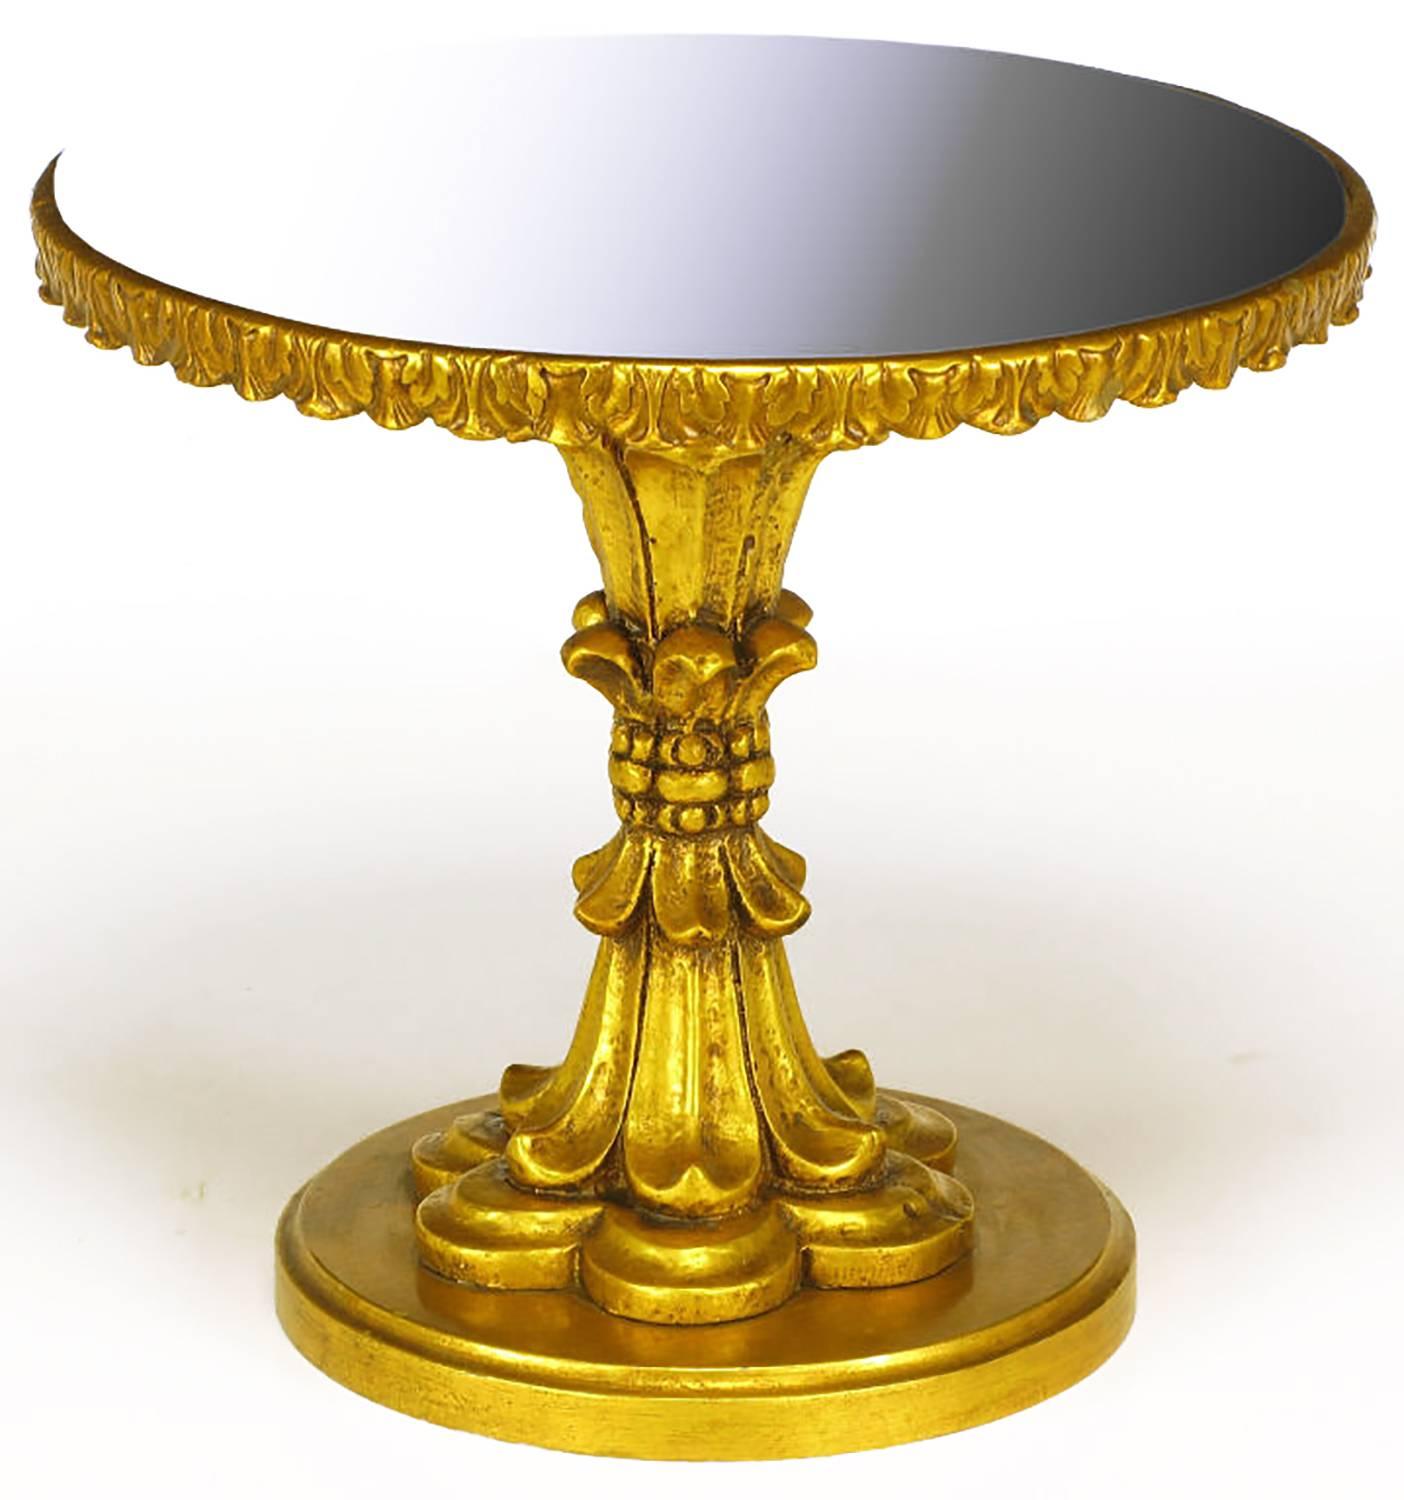 Elegant gueridon side table with inlaid black glass top. French style carved and gilt wood with bound acanthus leaf pedestal and scalloped apron. Also comes with a mirrored glass top, as an alternative to the black glass.